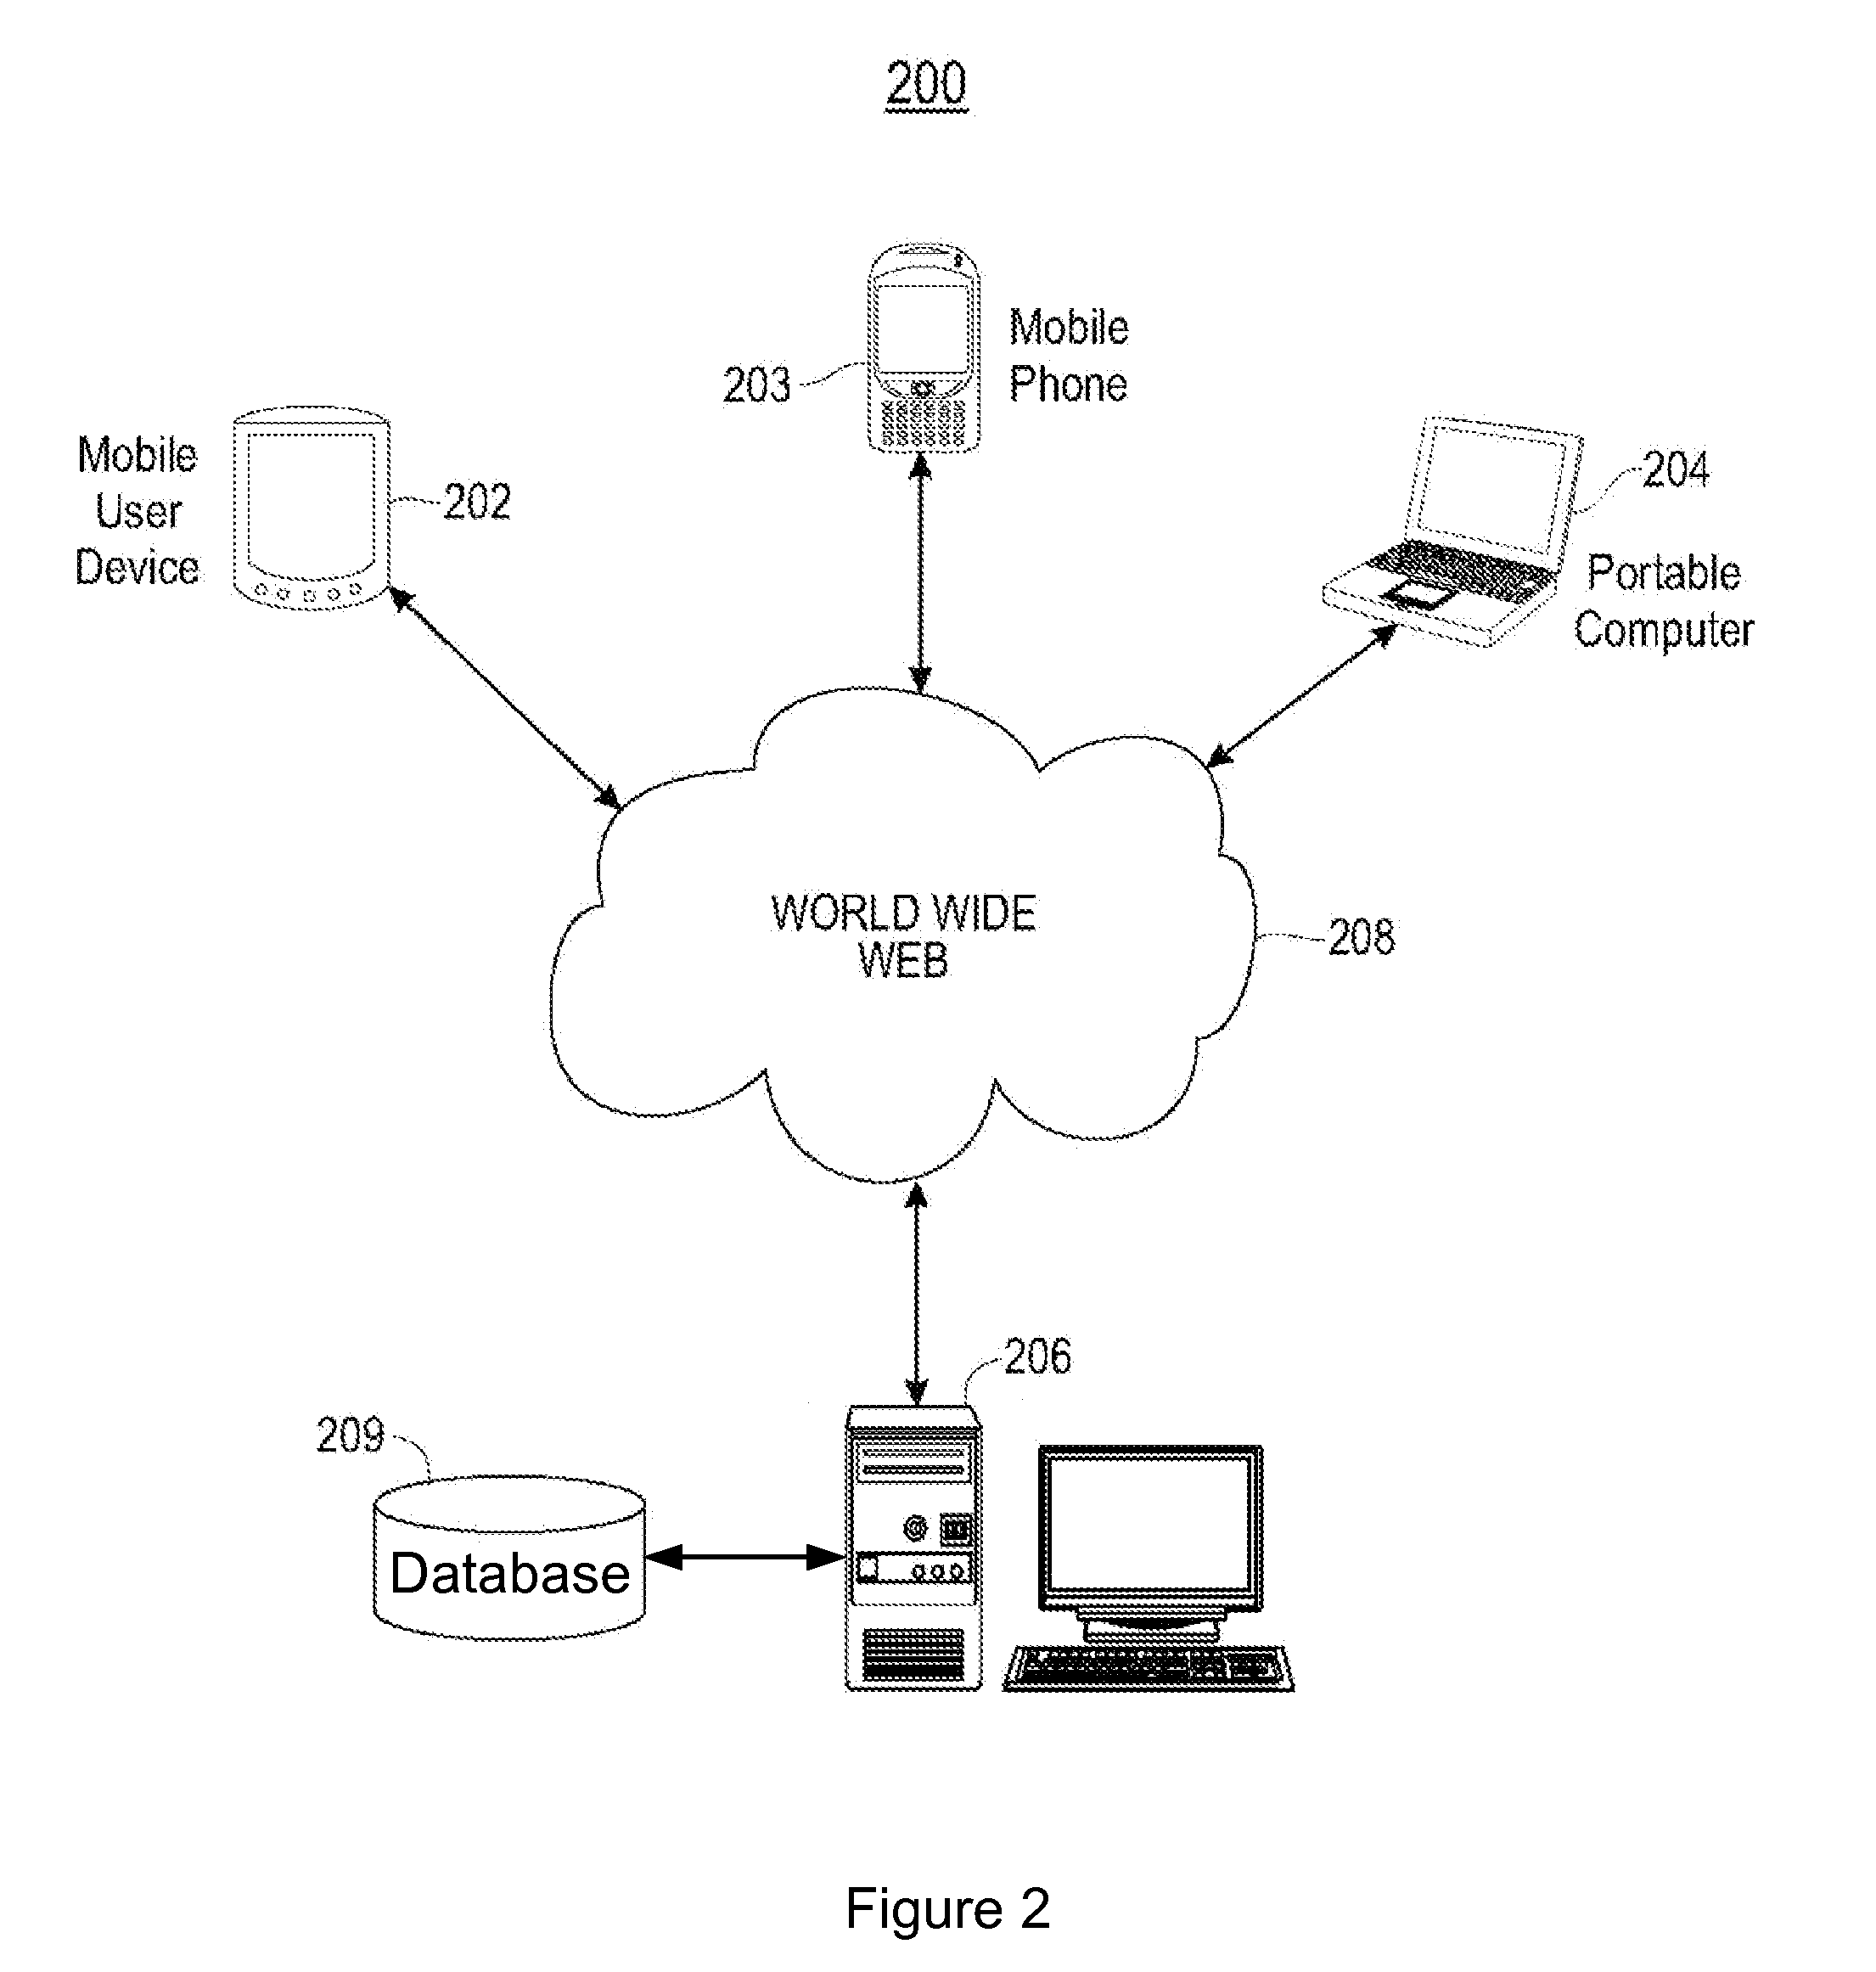 Partial authentication for access to incremental data